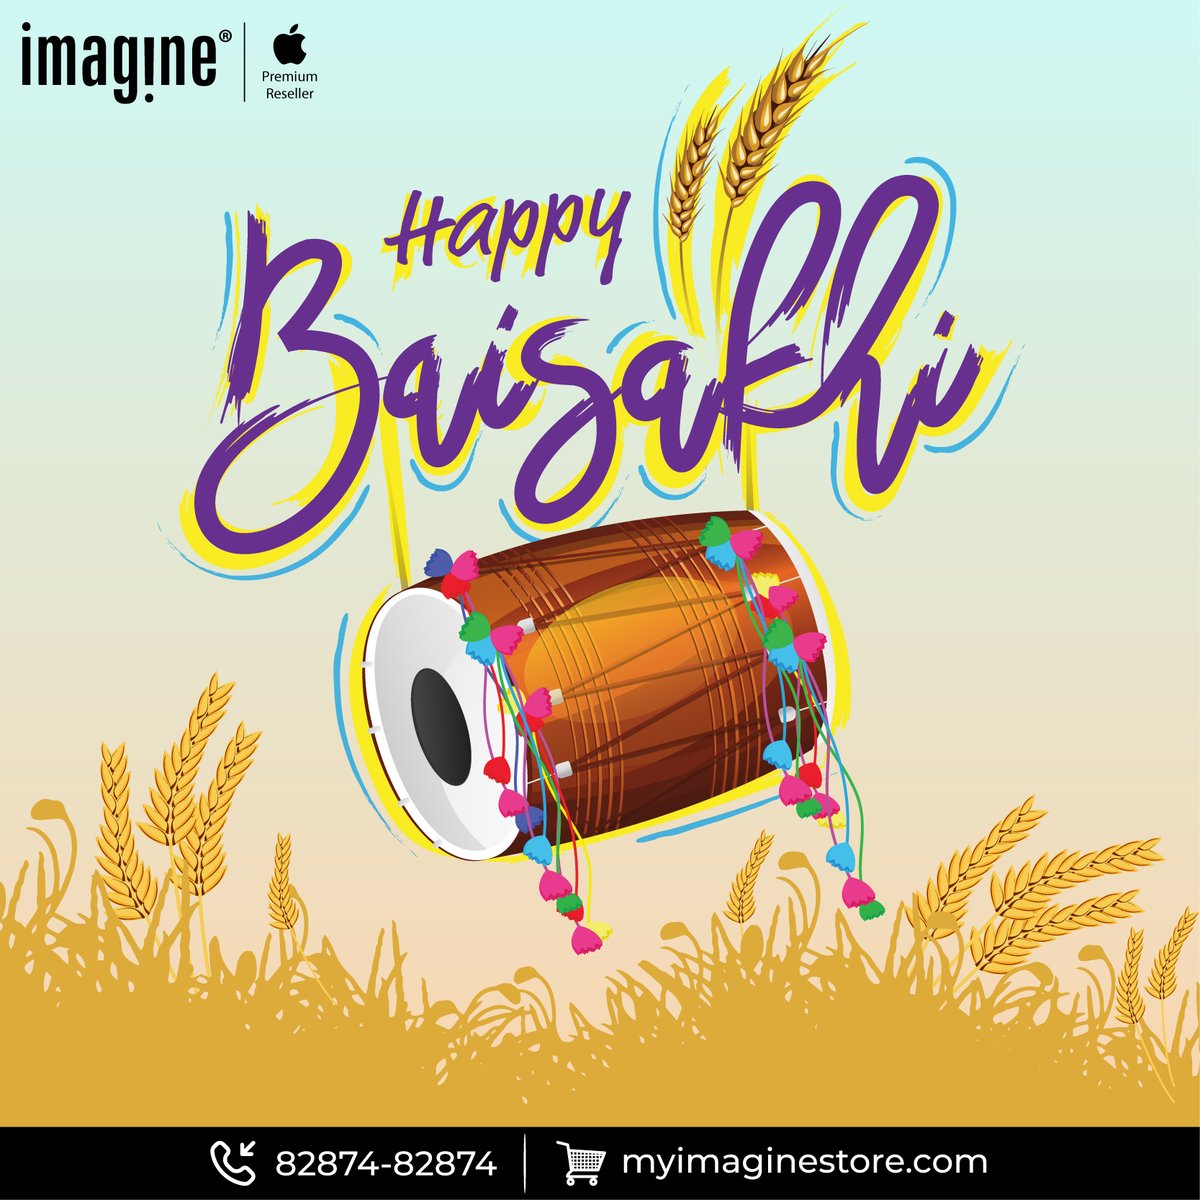 May this auspicious day bring joy and prosperity to you and your loved ones. Happy Baisakhi from @ImagineApplePR! #Apple #Tresor #Imagine #Baisakhi #HarvestSeason #Blessings